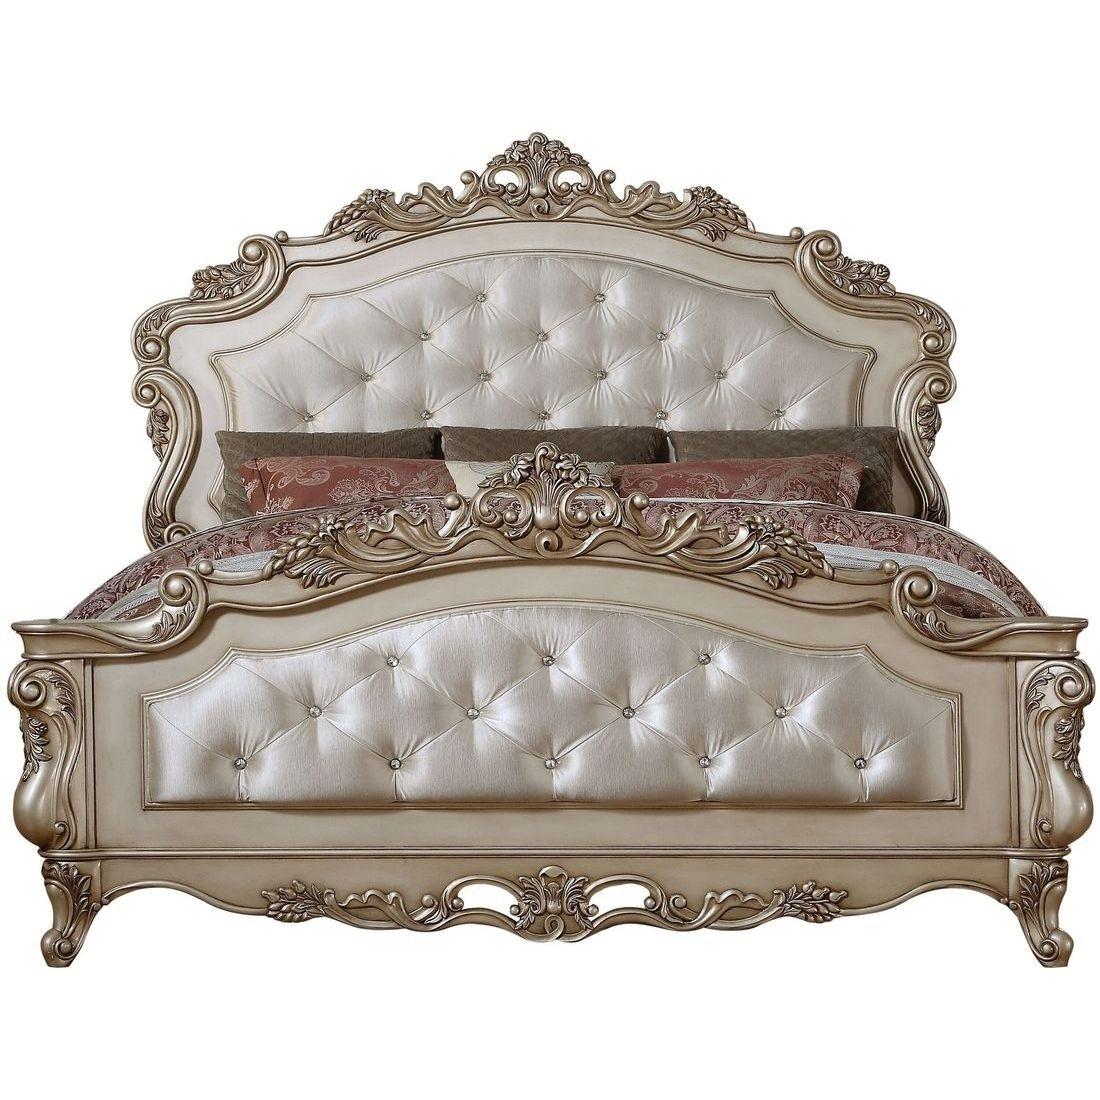 Classic, Traditional Panel Bed SKU: W002257615 SKU: W002257615 in Cream, Antique White Fabric